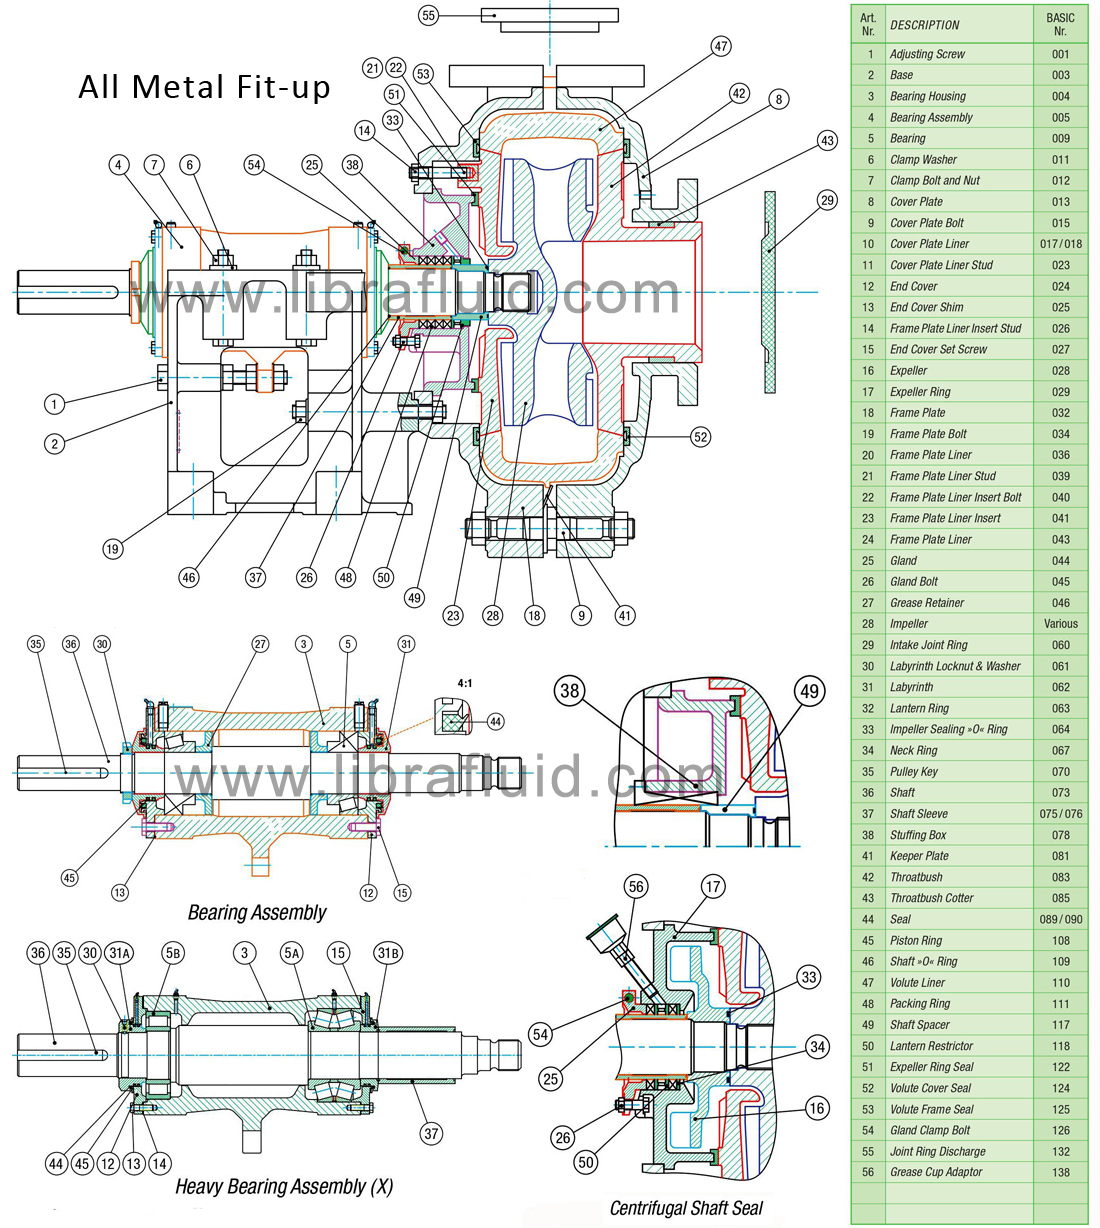 High chrome slurry pump assembly drawing